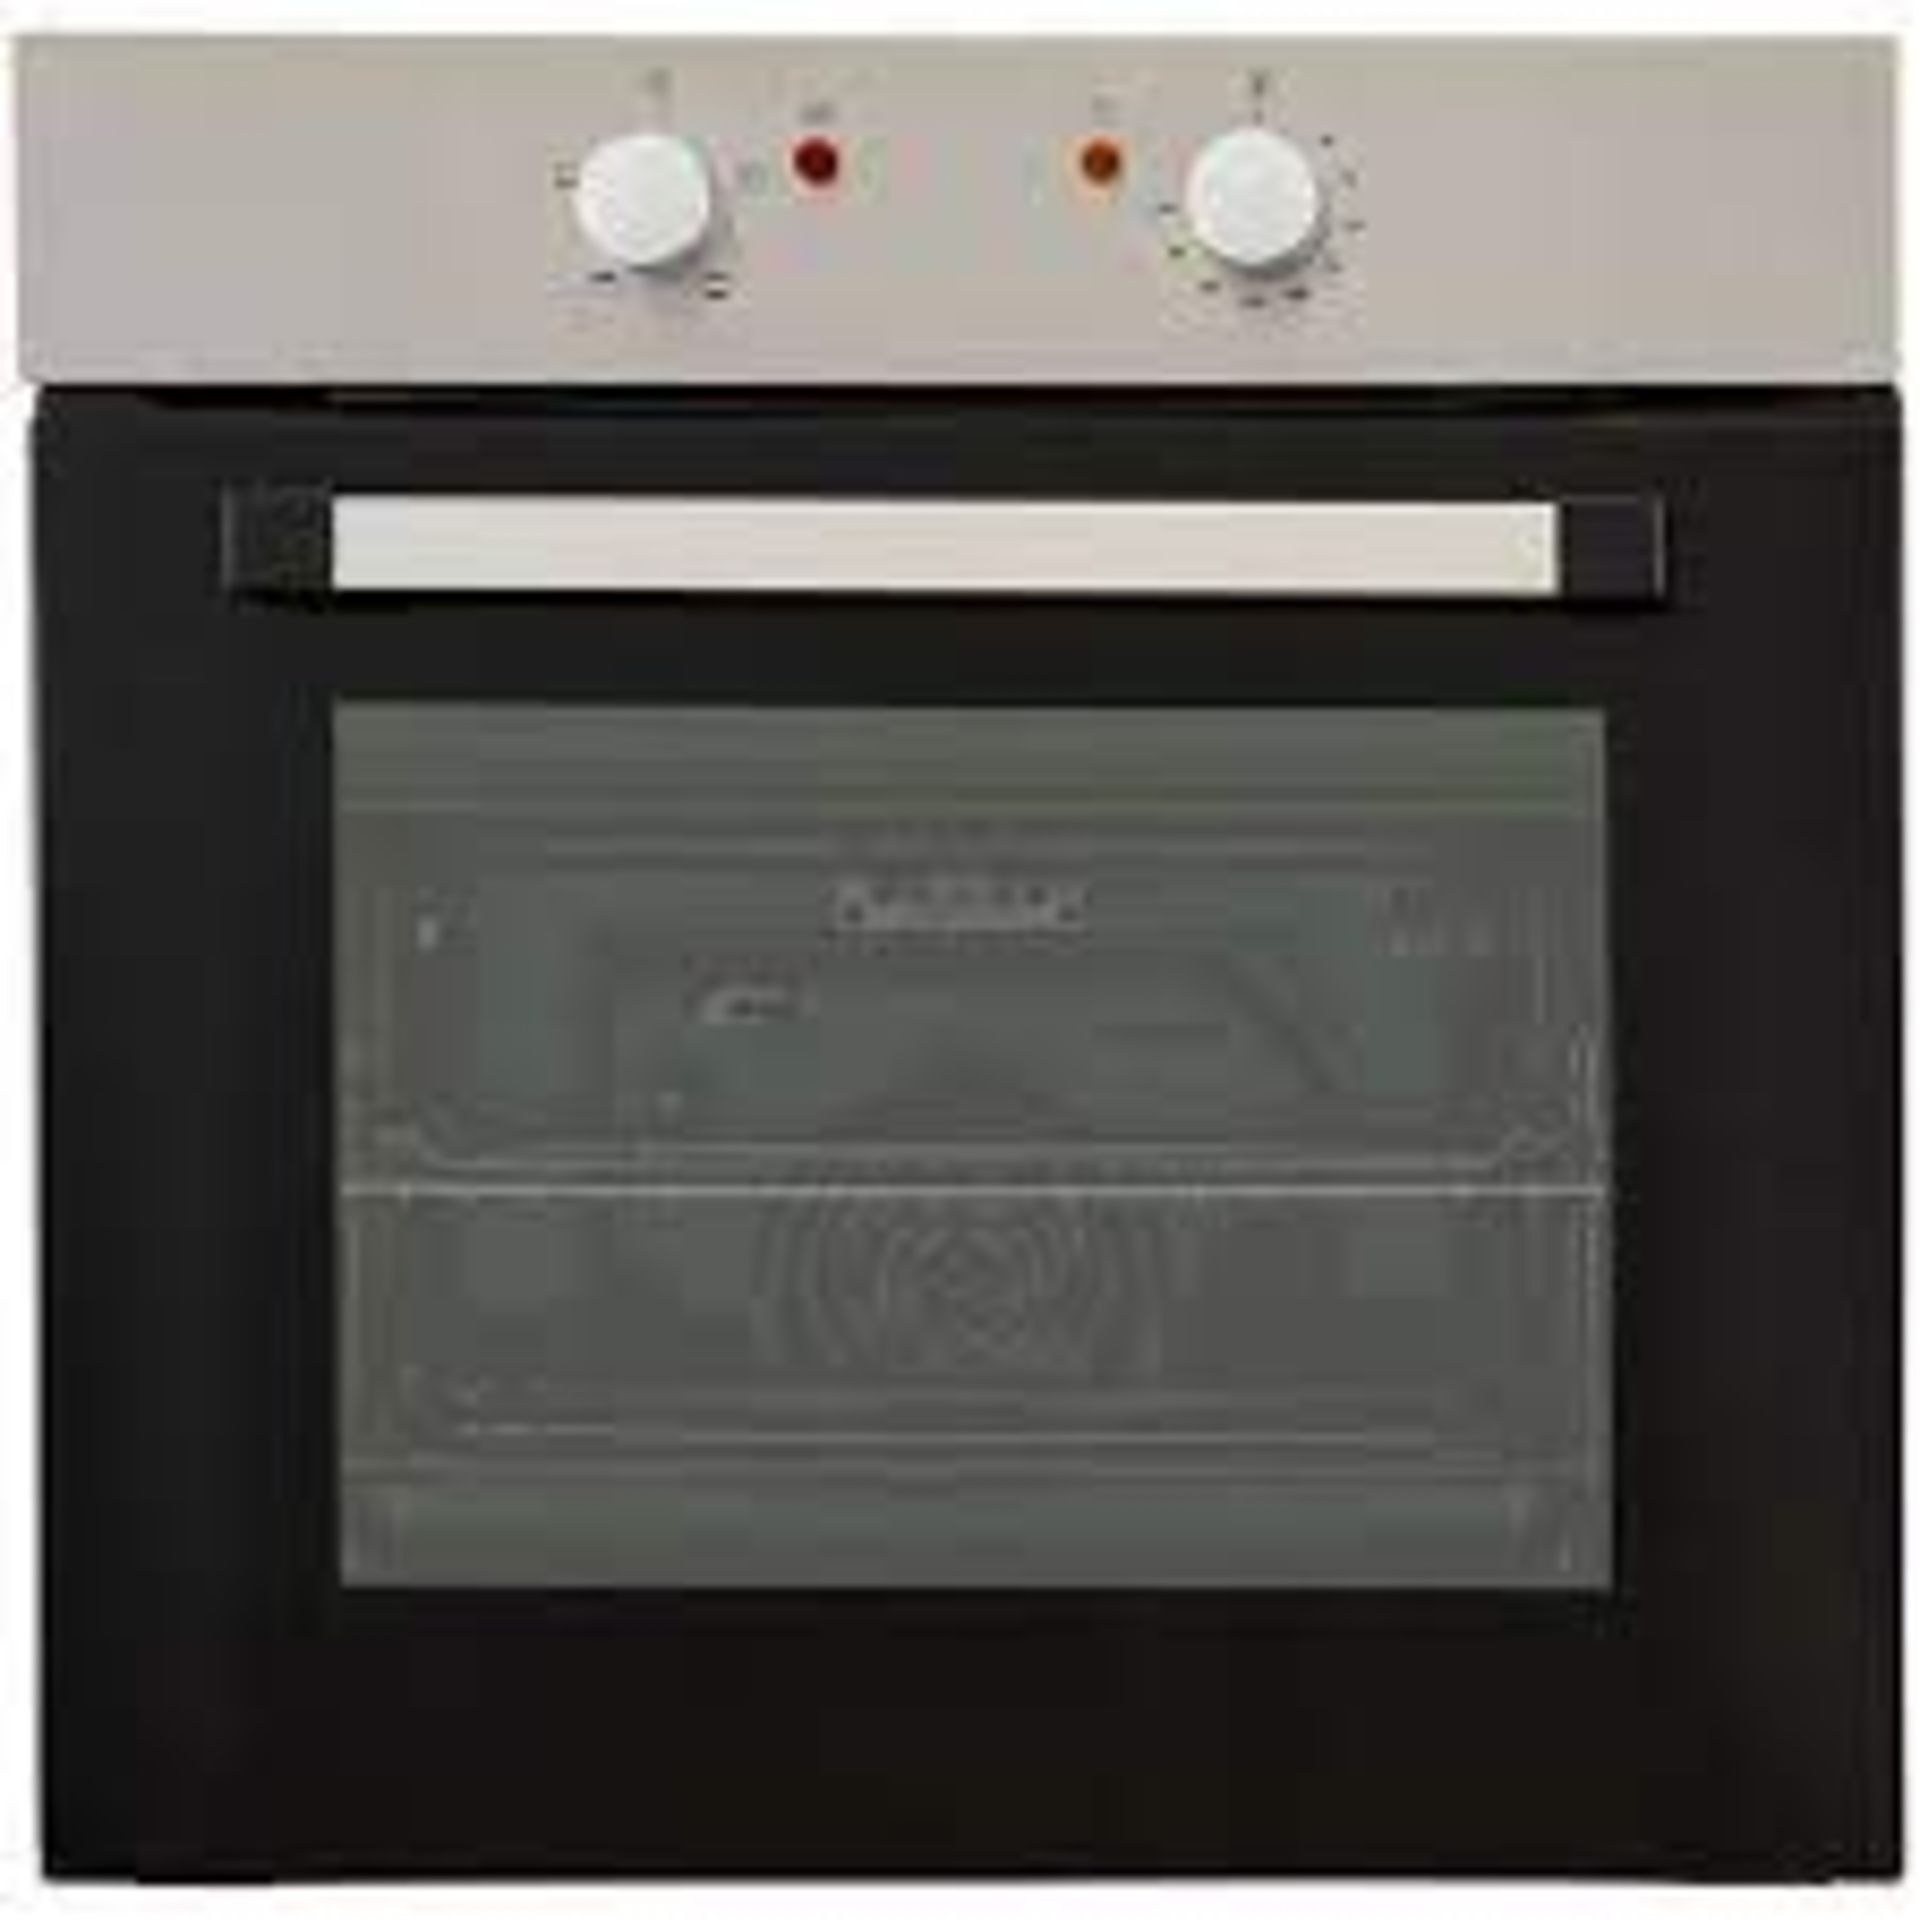 CSB60A Built-in Single Conventional Oven. This conventional, single oven has a 60L capacity with - Image 2 of 2